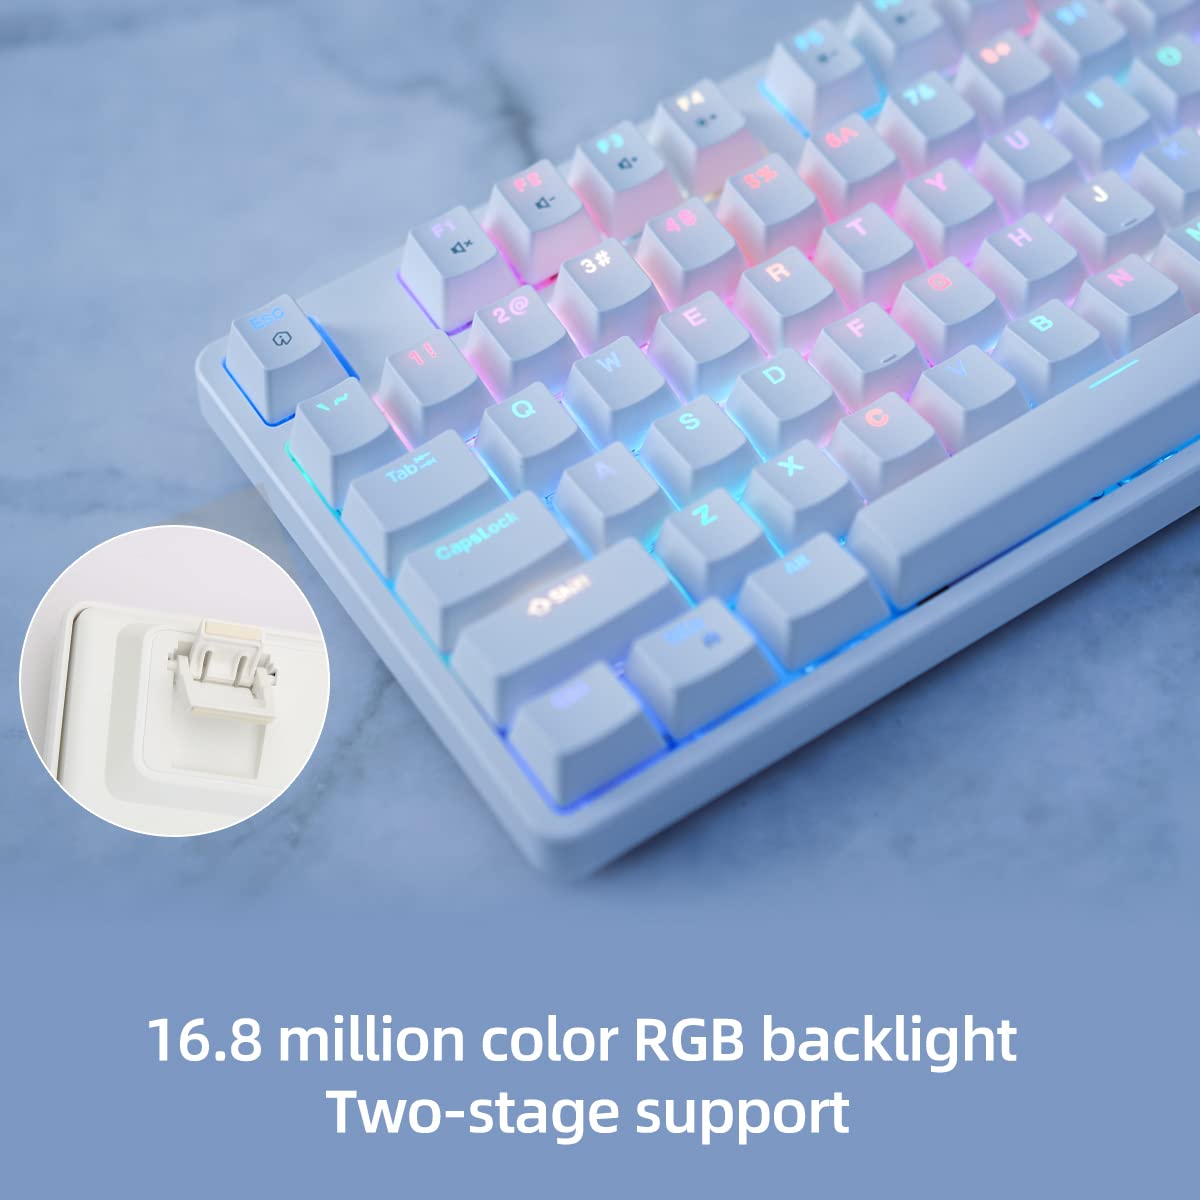 IROK FE87/104 RGB Mechanical Keyboard, Hot Swappable Gaming Keyboard, Customizable Backlit, Magnet Upper Cover Type-C Wired Keyboard for Mac Windows-White/Brown Switch